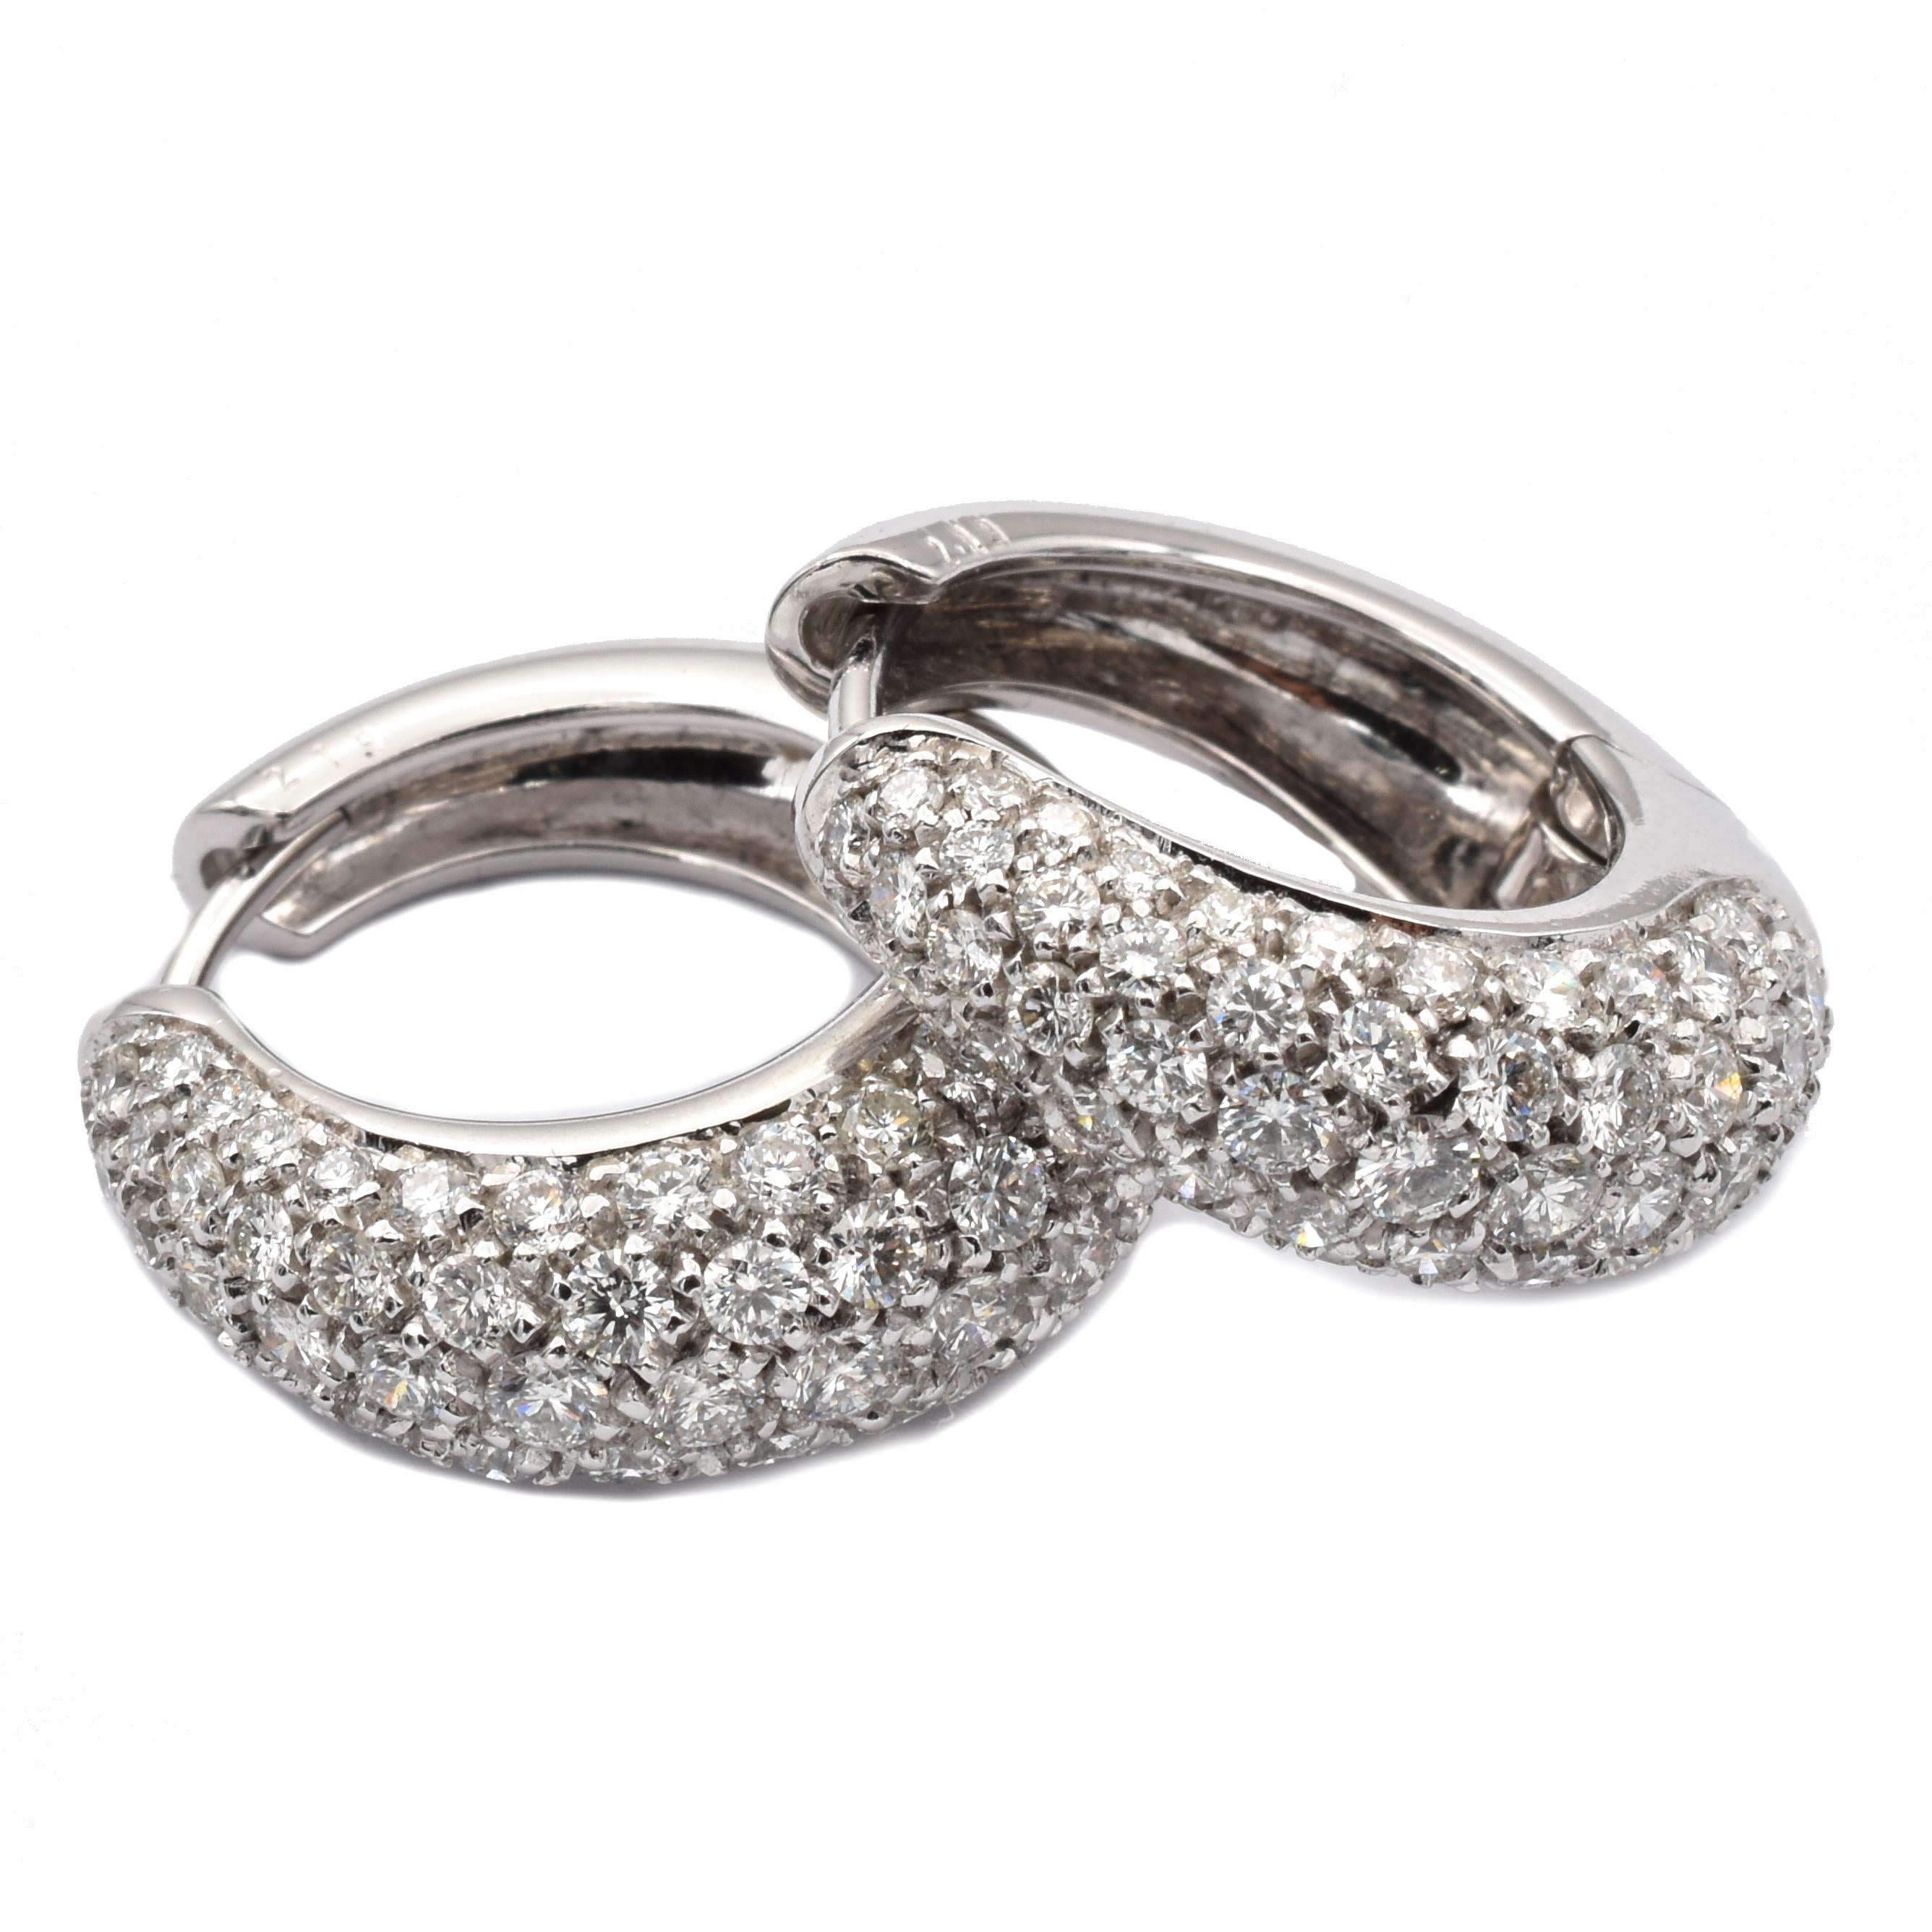 Contemporary Gilberto Cassola Diamond White Gold Hoop Earrings Made in Italy For Sale